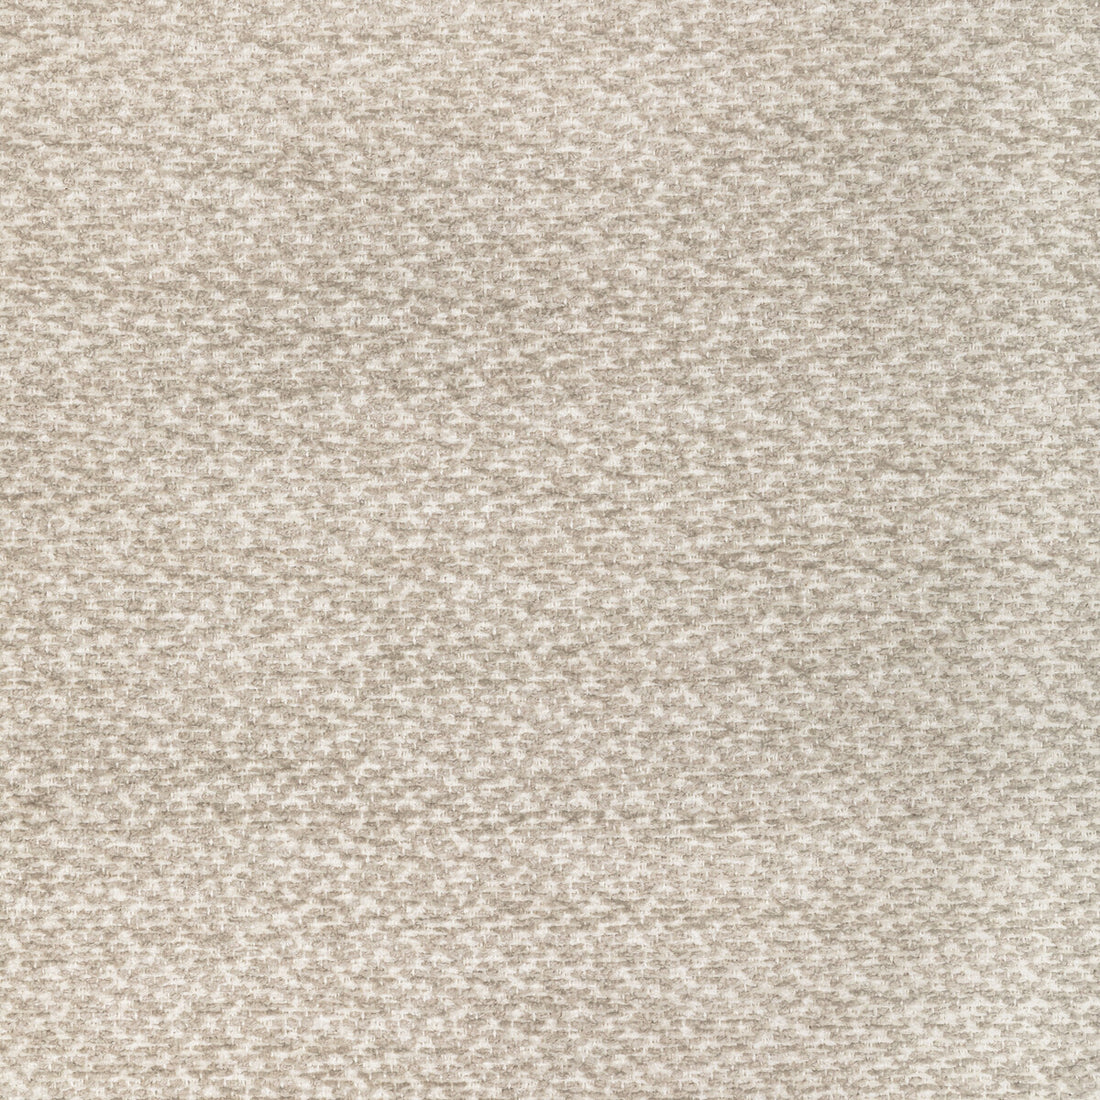 Sasson Texture fabric in pebble color - pattern 8022122.11.0 - by Brunschwig &amp; Fils in the Chambery Textures III collection